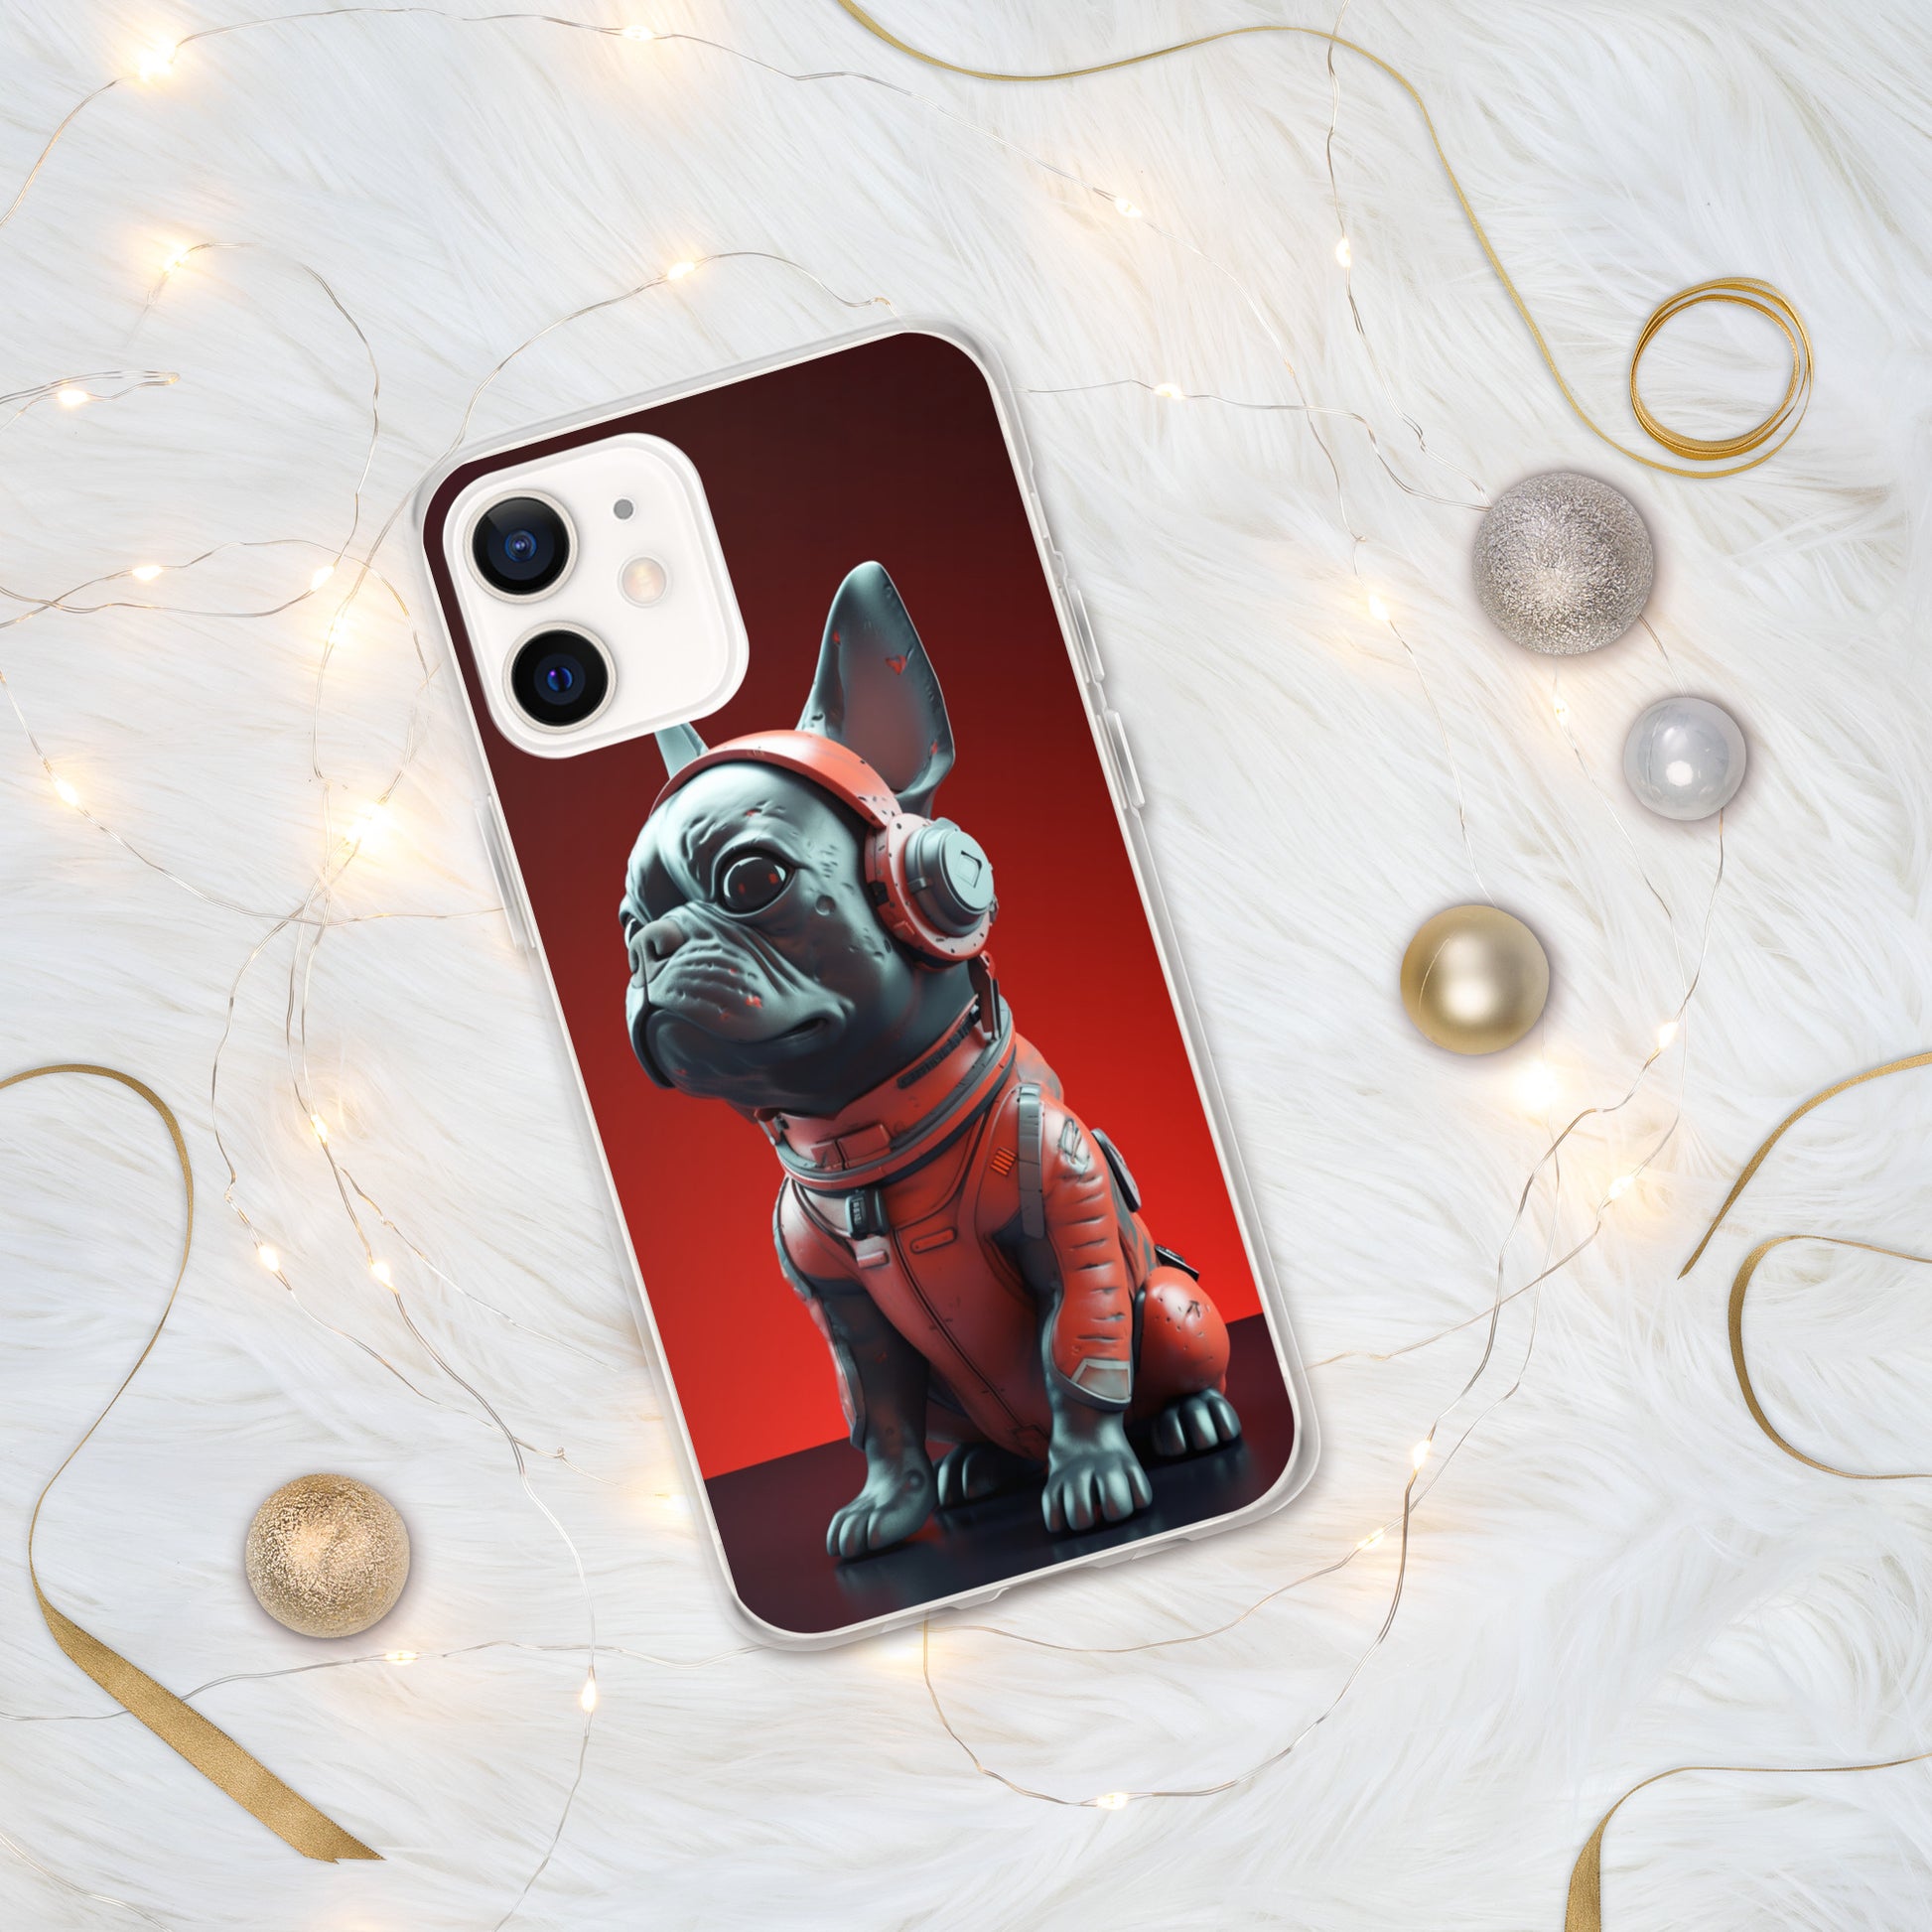 Durable Elegance iPhone Case - Exquisite Frenchie Hybrid Design for Chic Protection